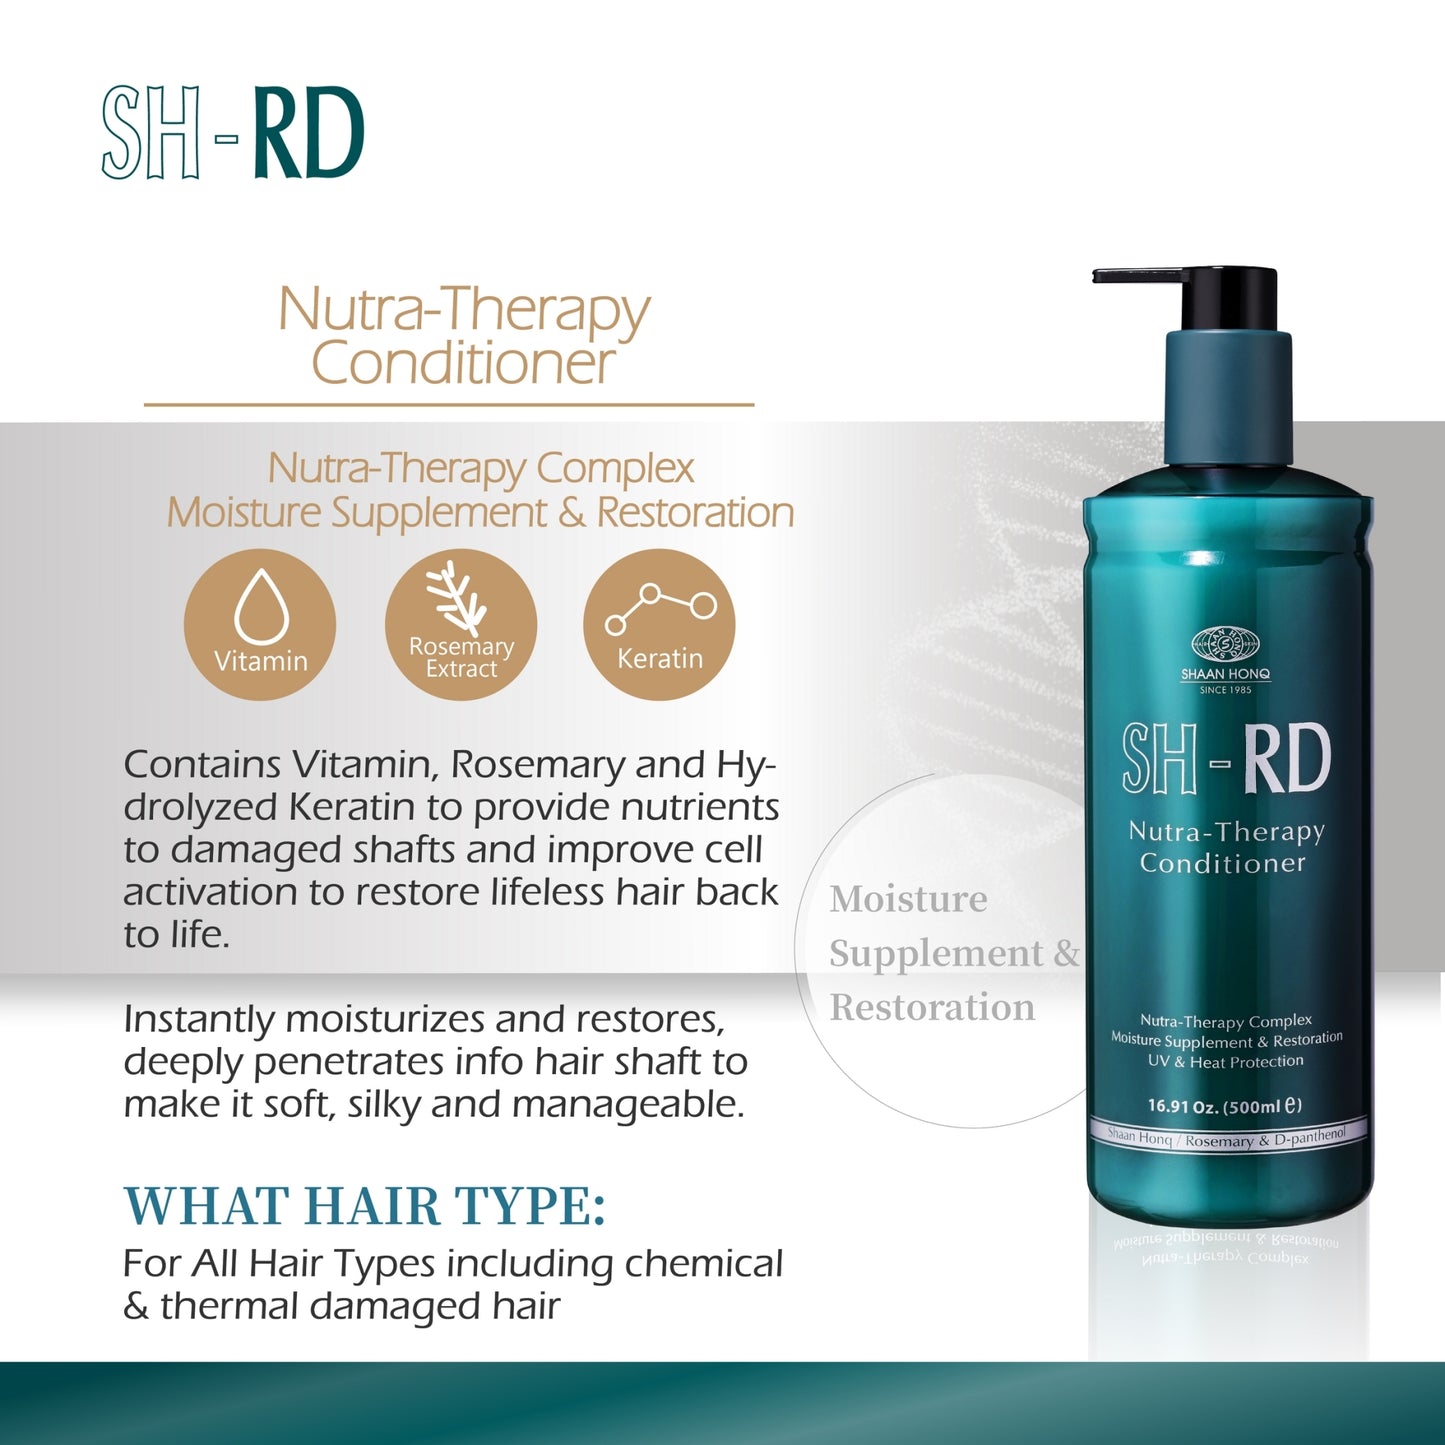 SH-RD Nutra-Therapy Conditioner (16.9oz/500ml)